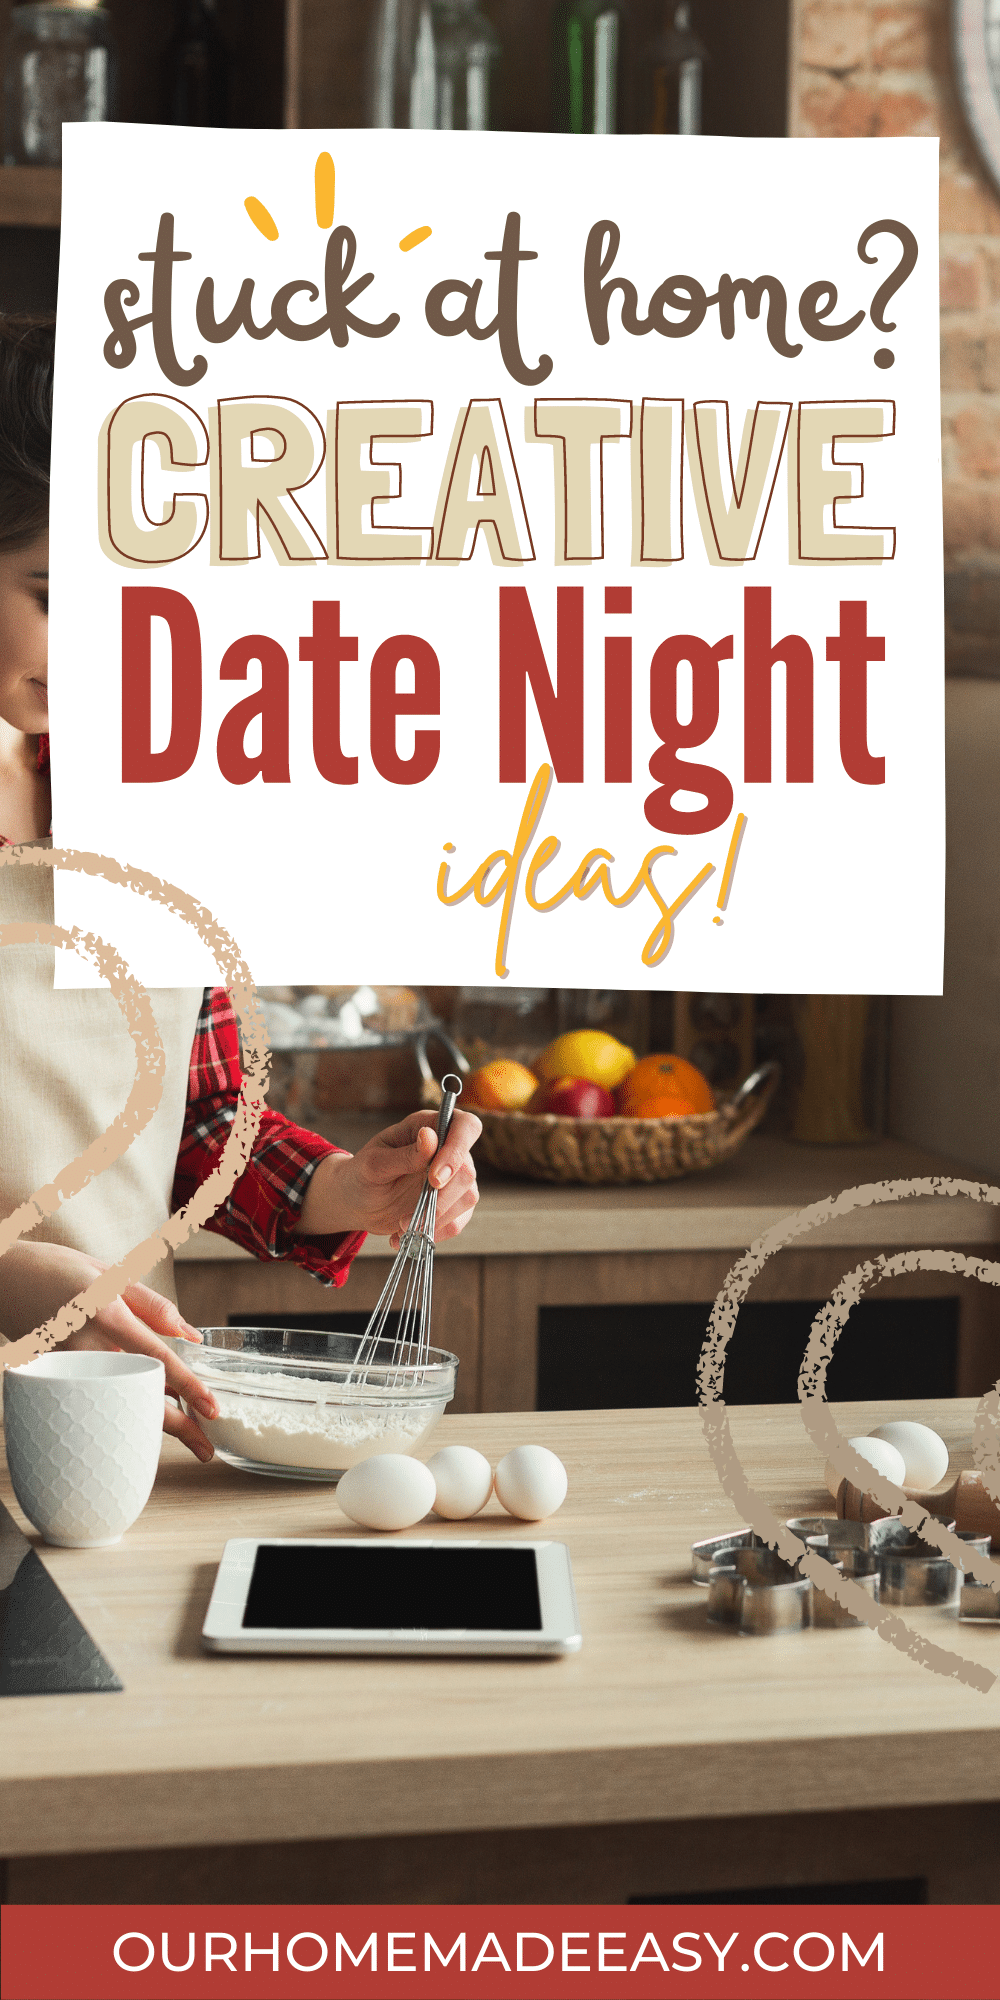 At-home Date Night Ideas